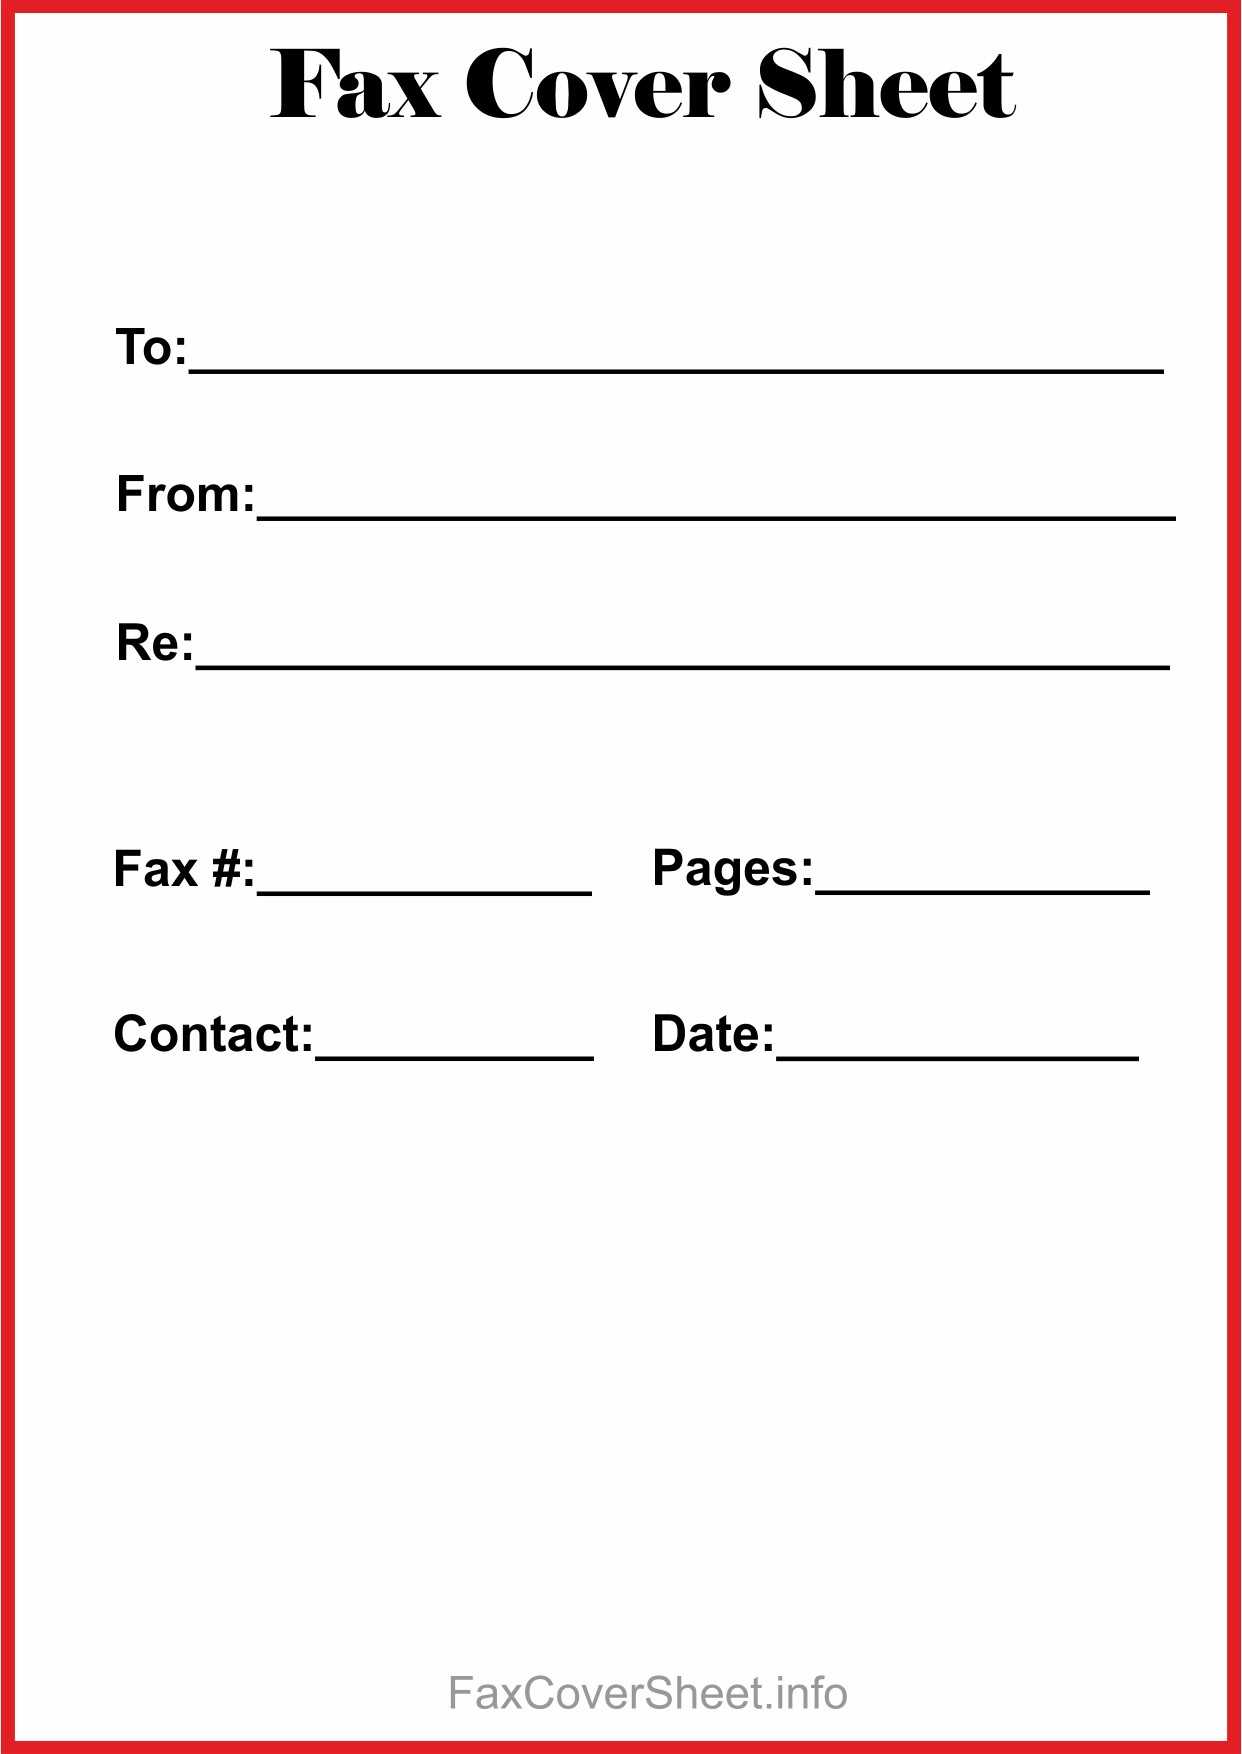 How To Fax From Computer - Dev - Medium With Regard To Fax Cover Sheet Template Word 2010